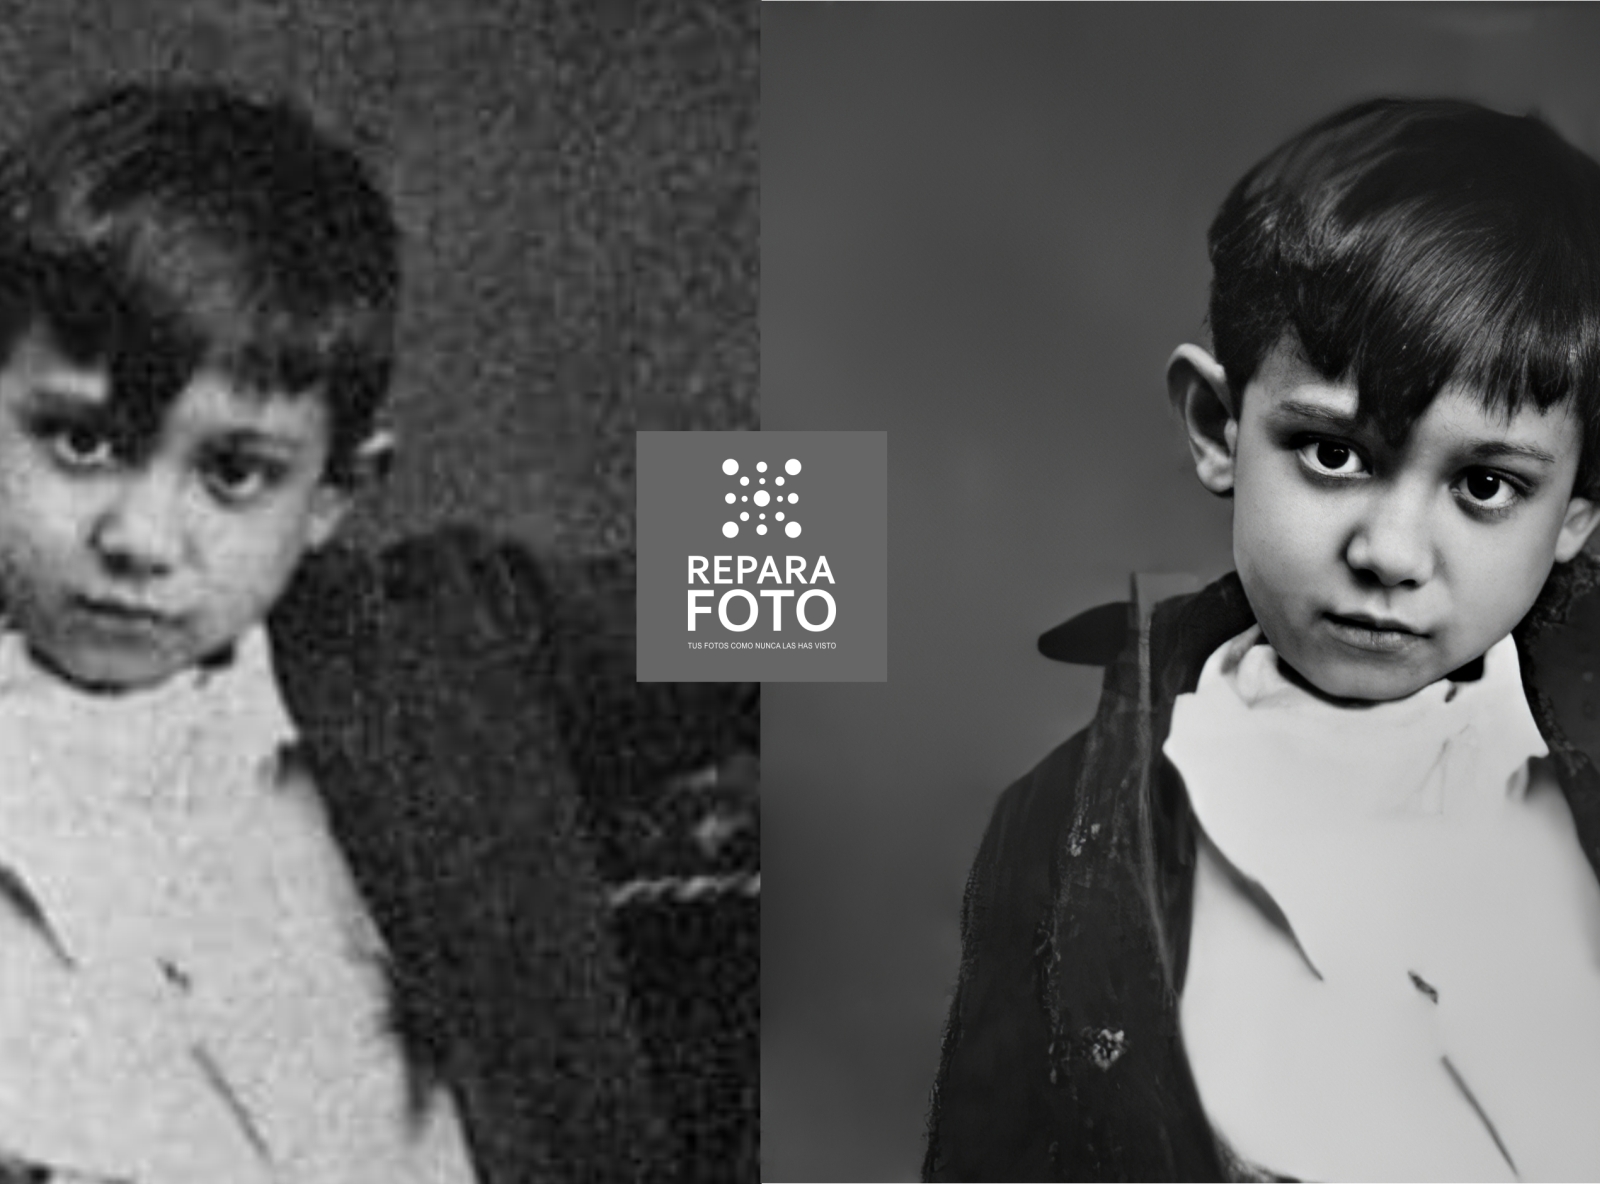 Young Picasso 1889 restored and rescaled to ultra resolution ia inteligence artificial rephotographic restored upscaling